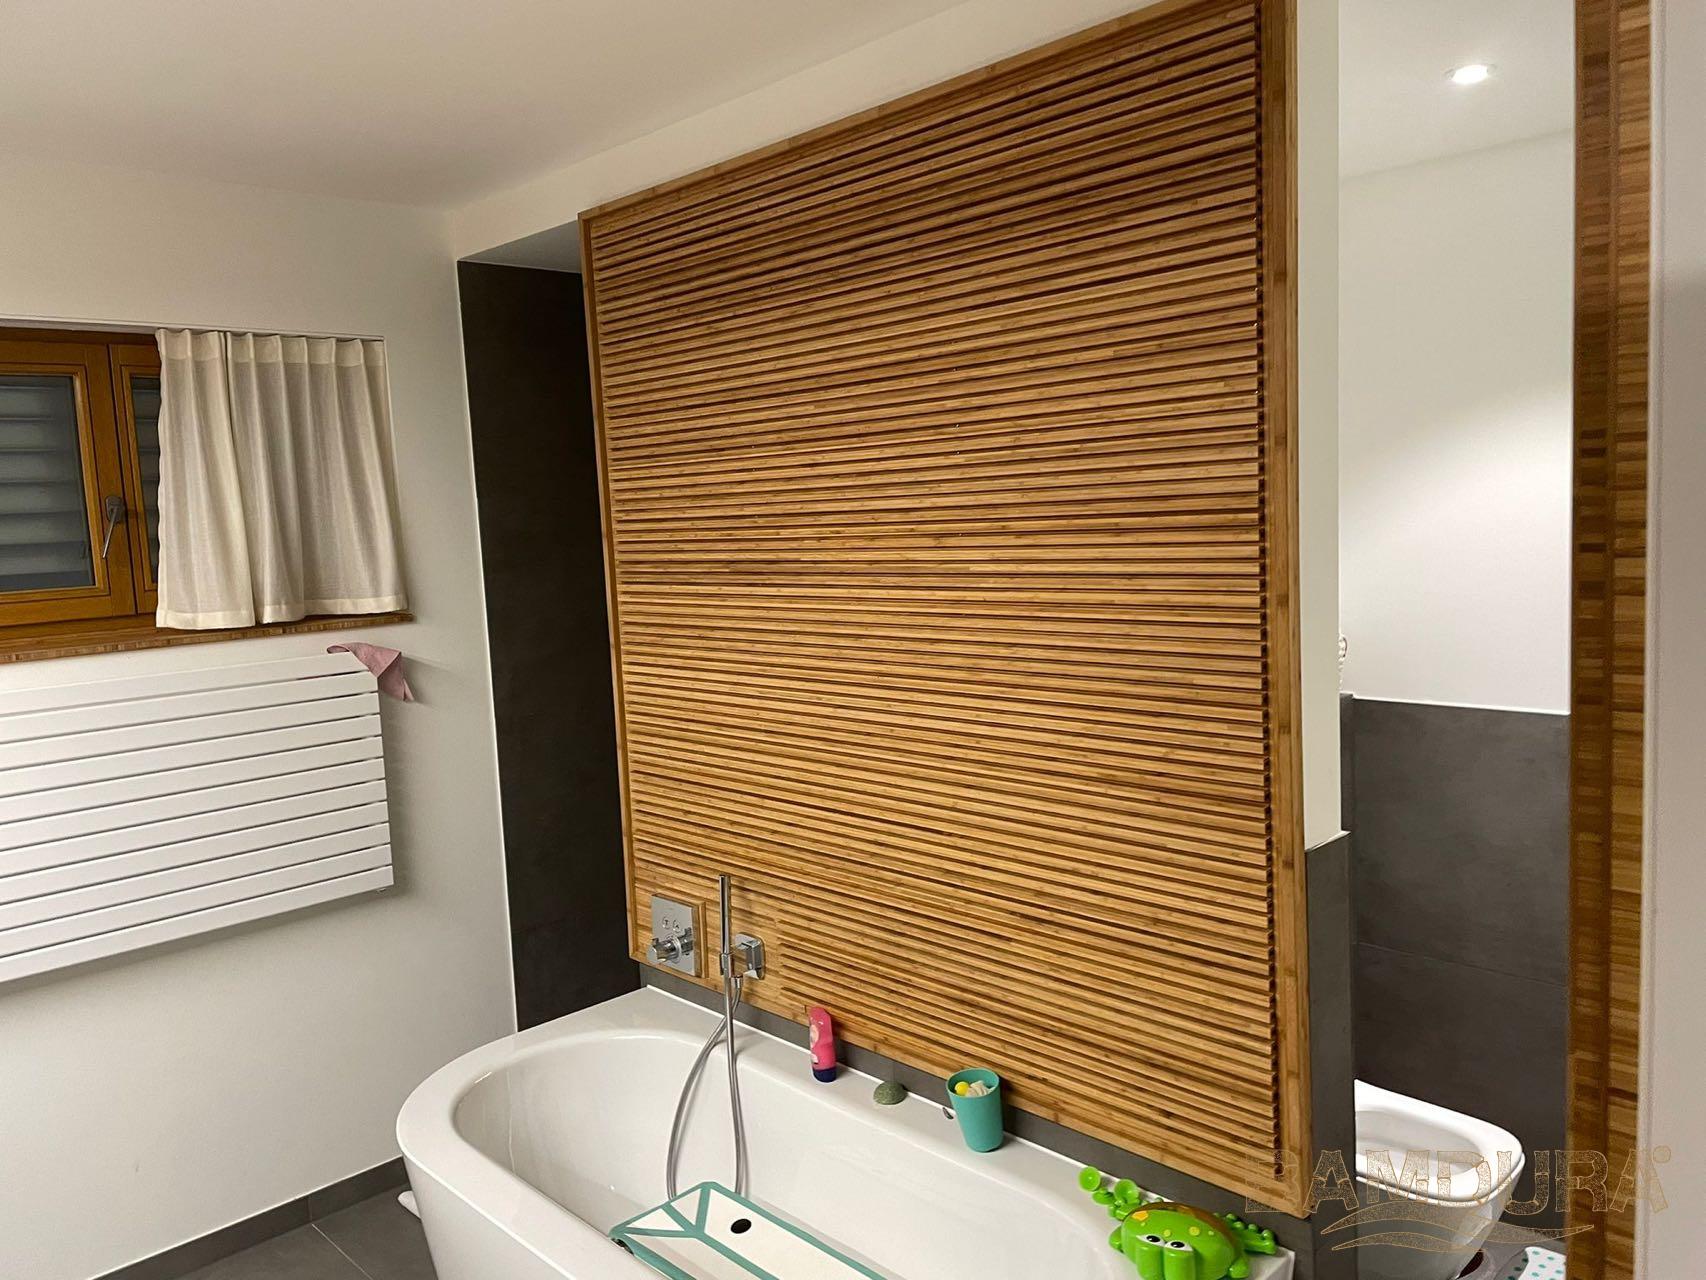 Copy of Bamdura-BAMBOO-wall_paneling-installed_snake_profile_bathroom_accent_wall-11302023